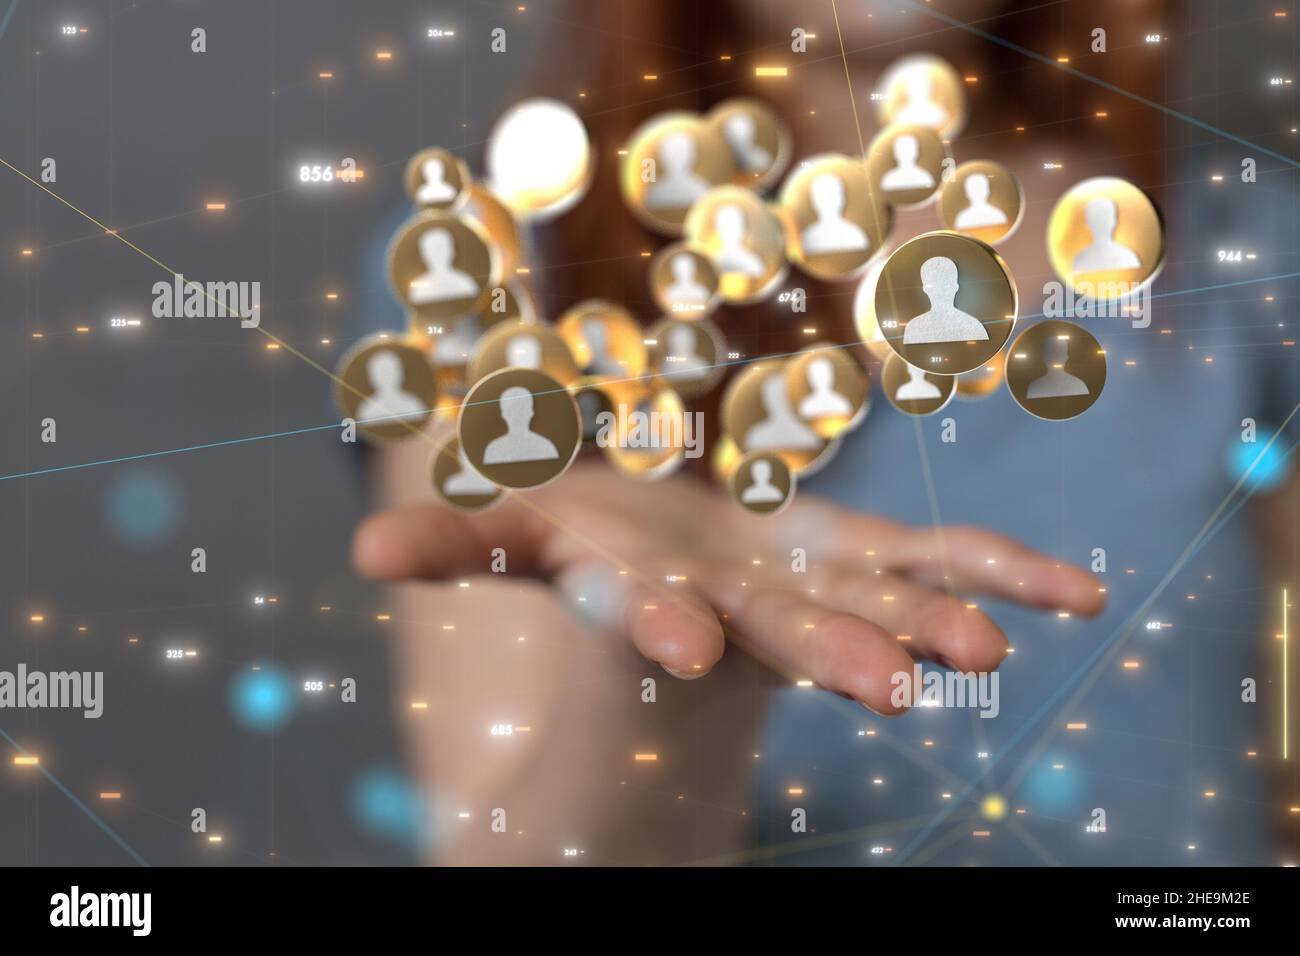 Shallow focus of a human hand holding connected human icons, team networking concept Stock Photo